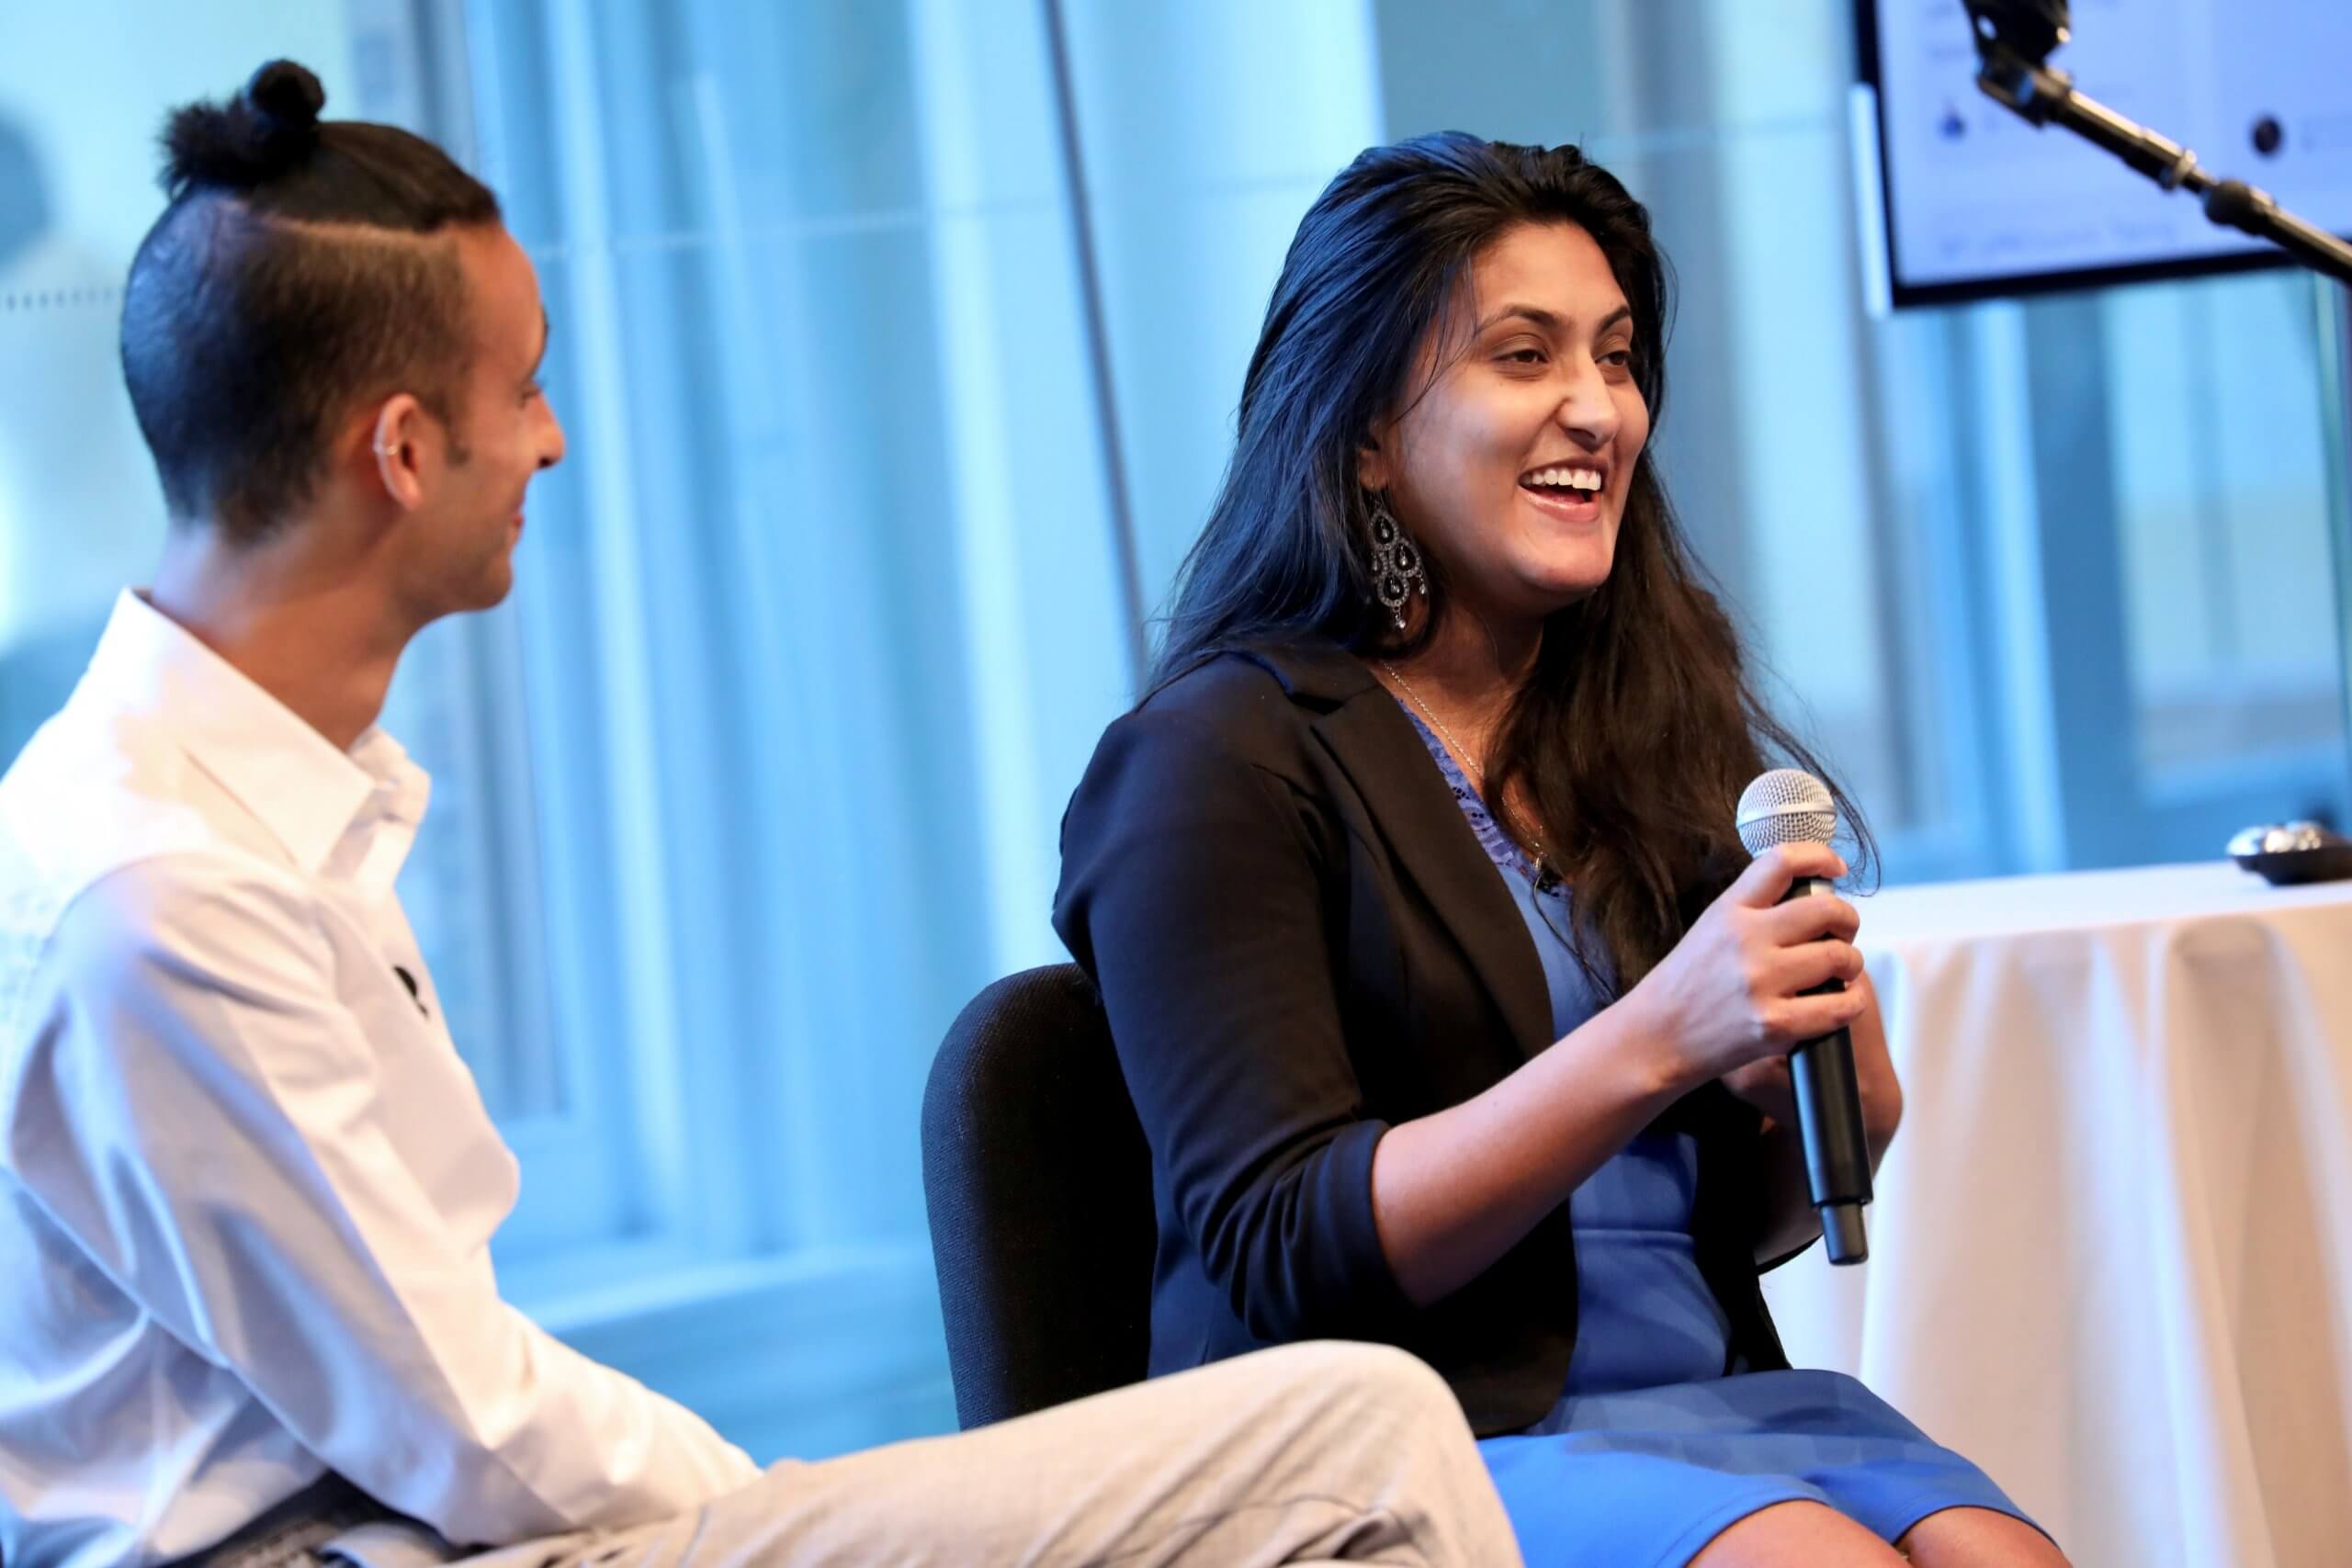 A man and woman talking at a conference. Sena Pottackal is the woman talking on the right hand side. She is holding a microphone.